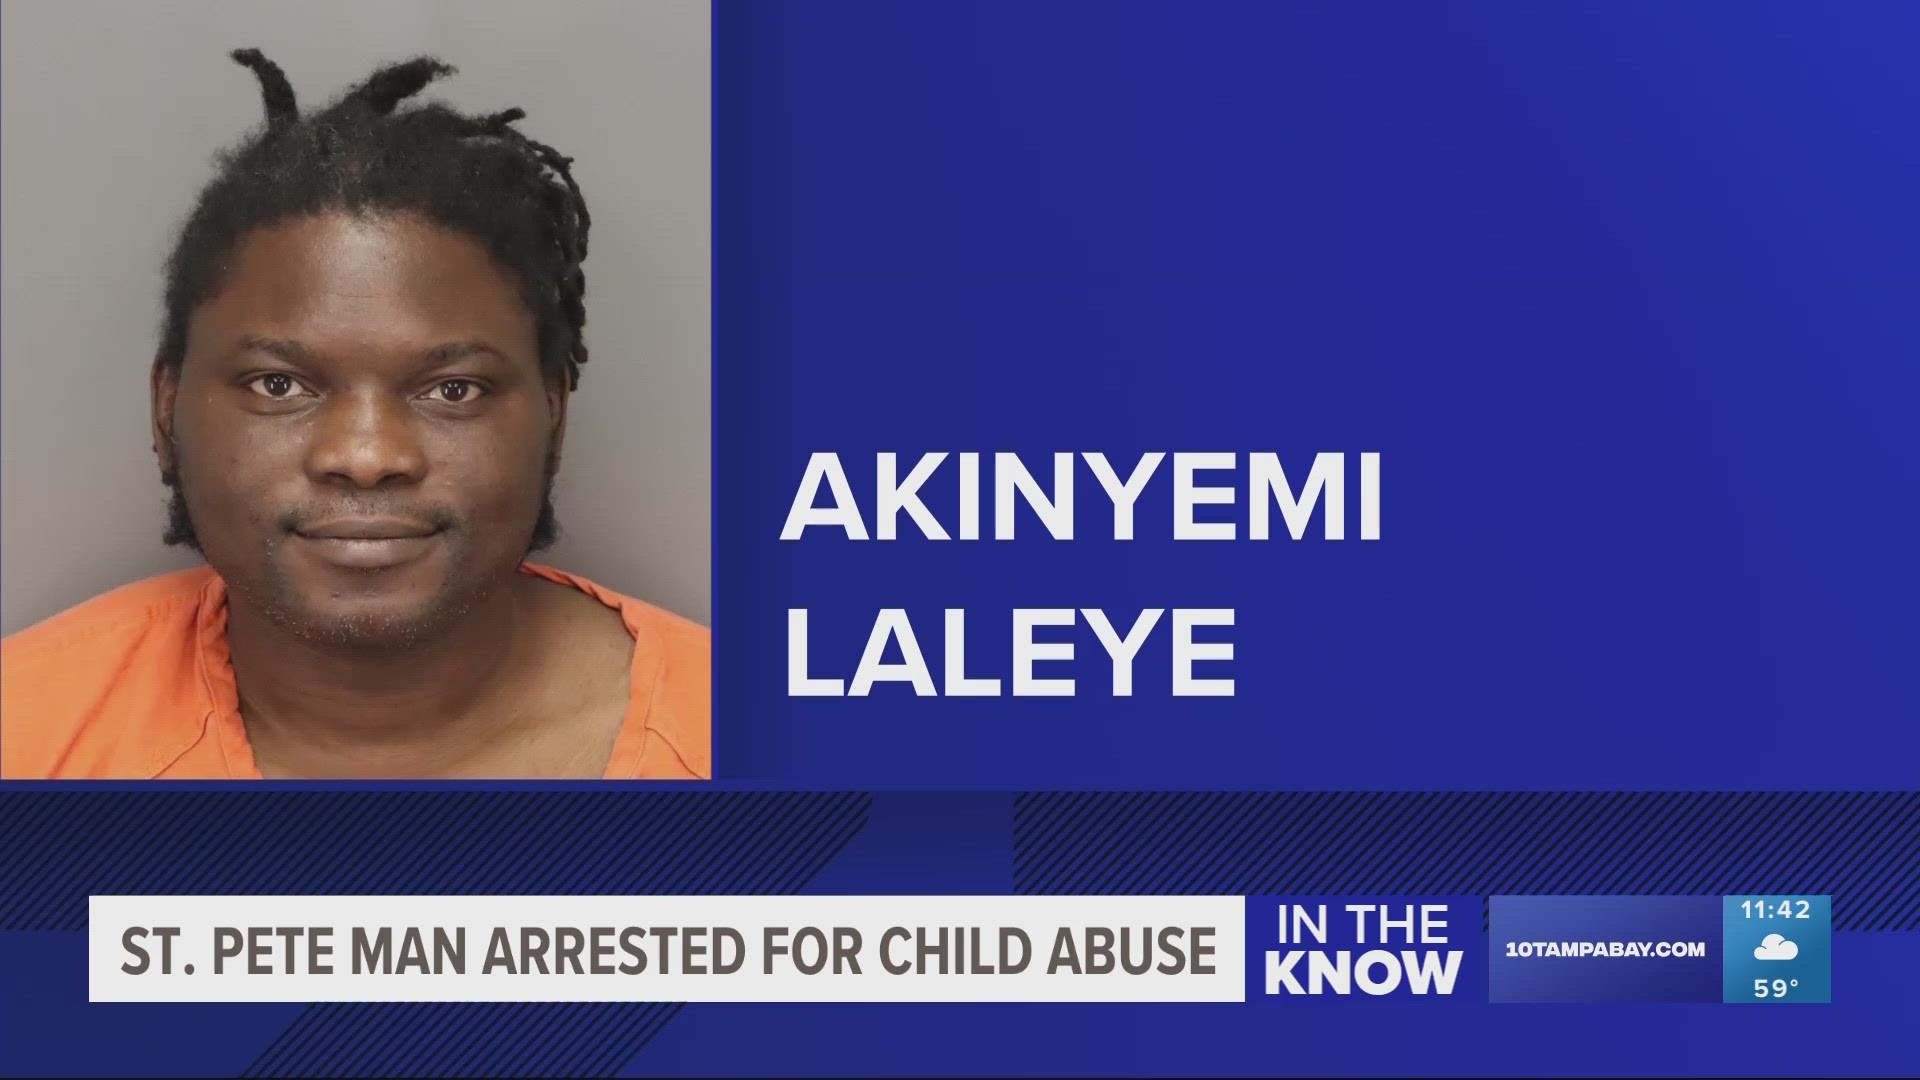 Akinyemi Akinleye Laleye, 41, was charged with a felony after admitting to "whooping" the child, the document says.